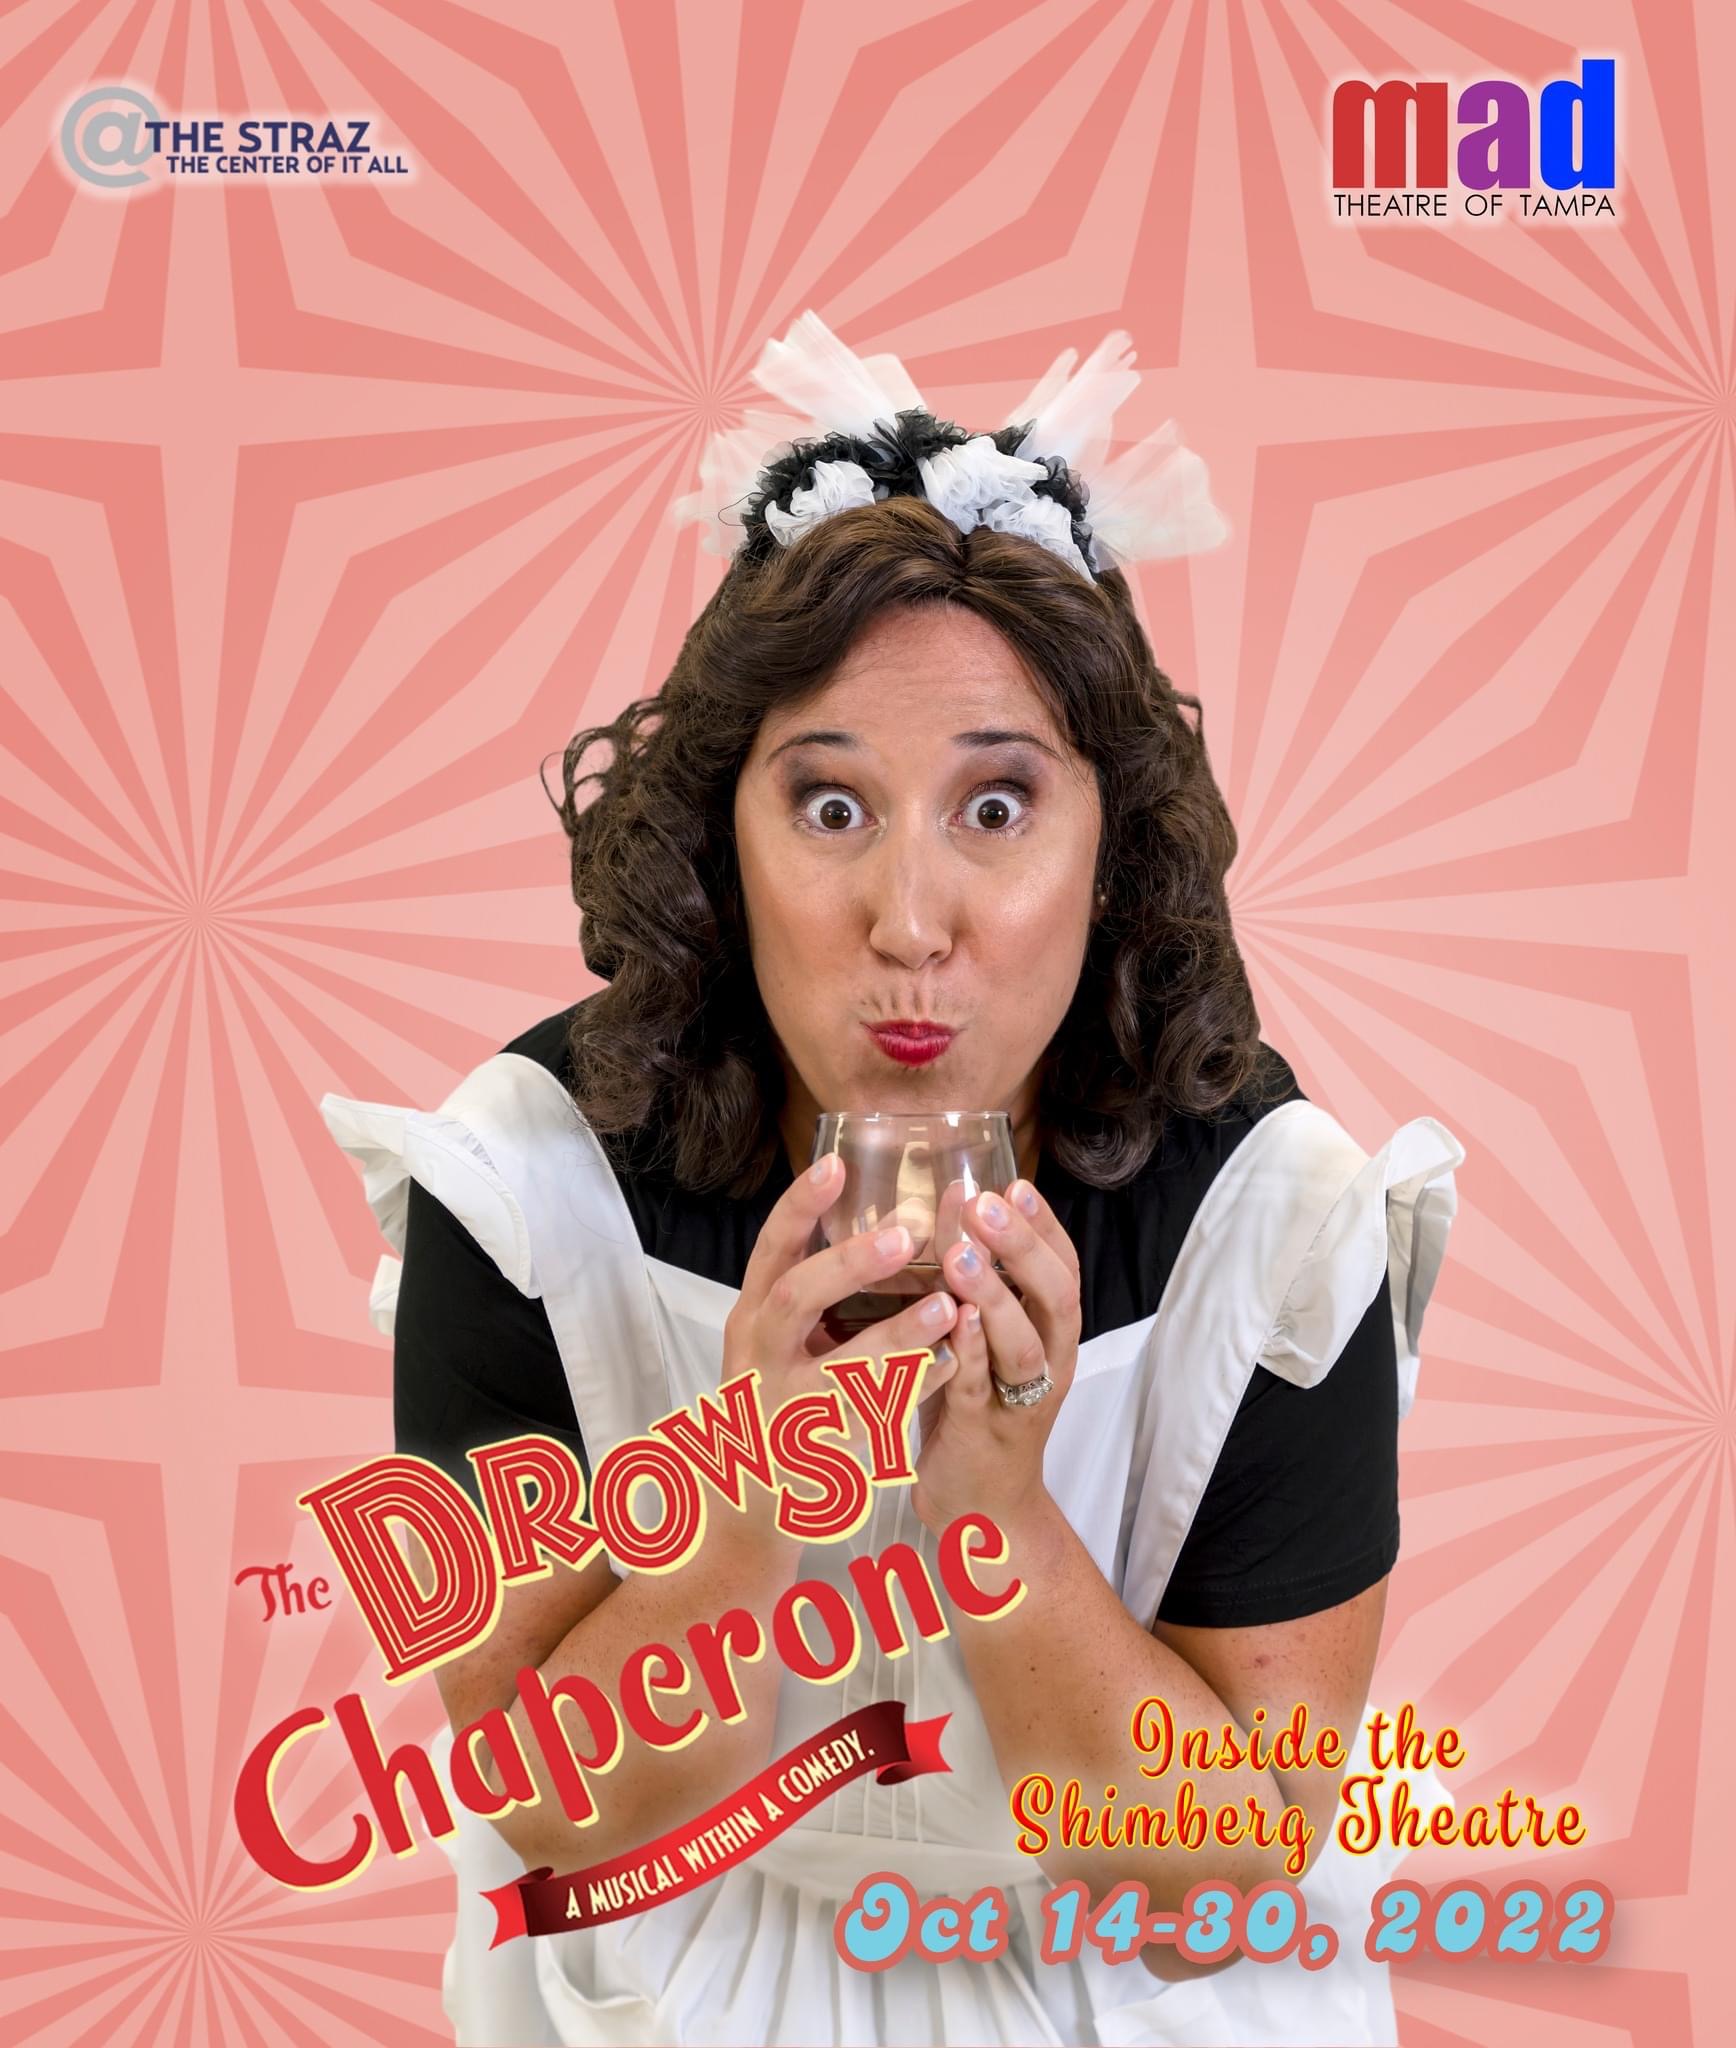 Meet Mildred as played by Erica Borges Vitelli in mad Theatre of Tampa’s “The Drowsy Chaperone”.